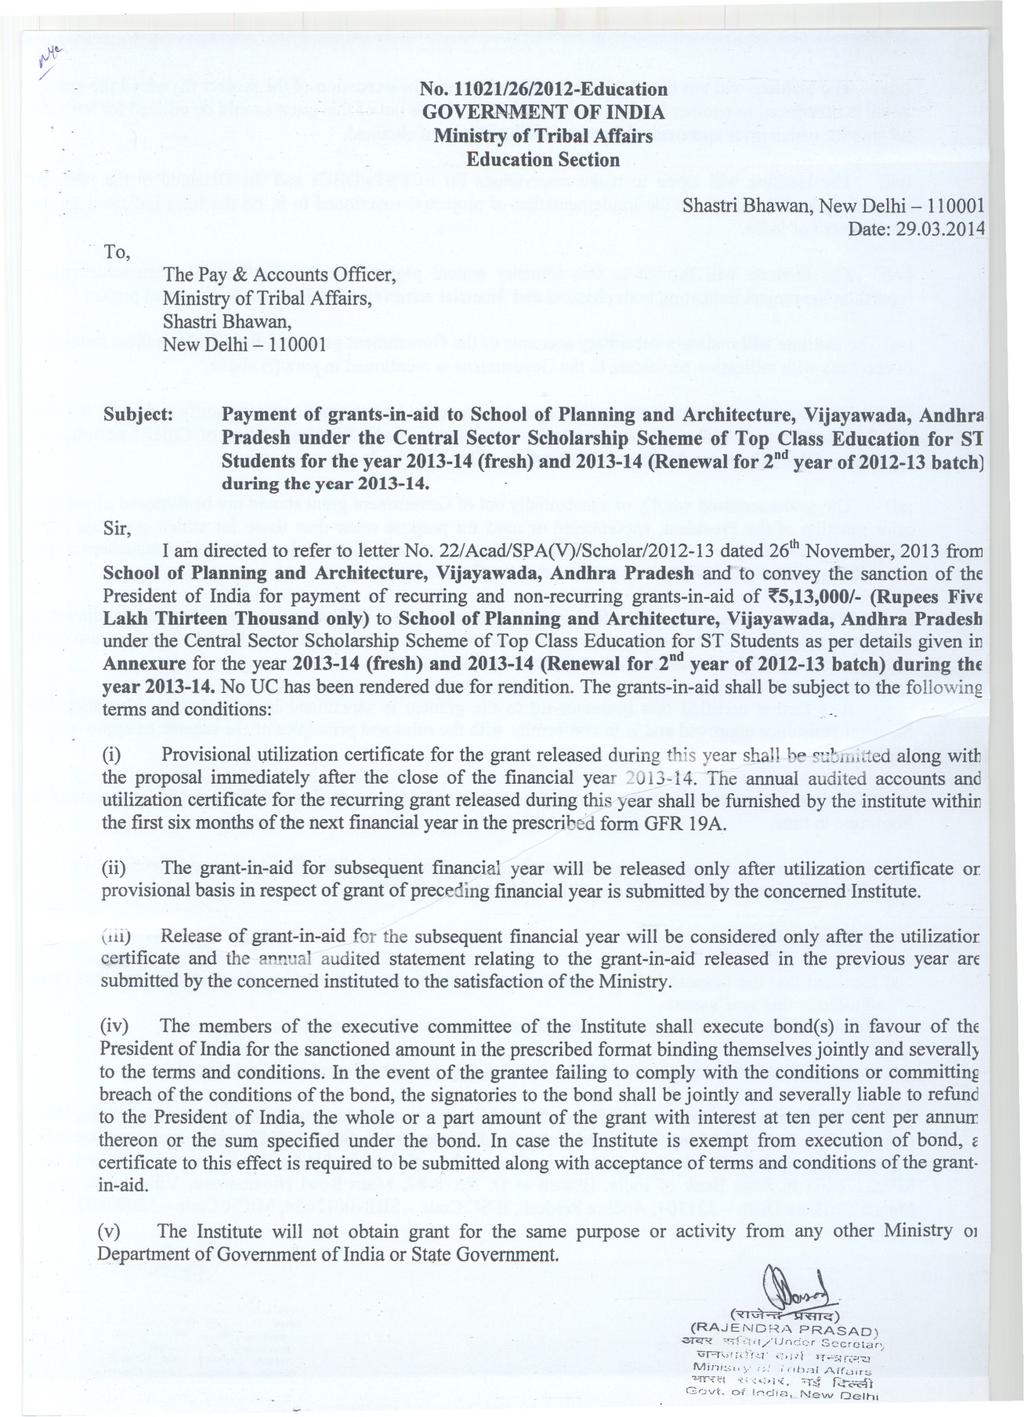 No. 1l021/26/2012-Education GOVERNMENT OF INDIA Ministry of Tribal Affairs Education Section To, The Pay & Accounts Officer, Ministry of Tribal Affairs, Shastri Bhawan, New Delhi - 110001 Shastri